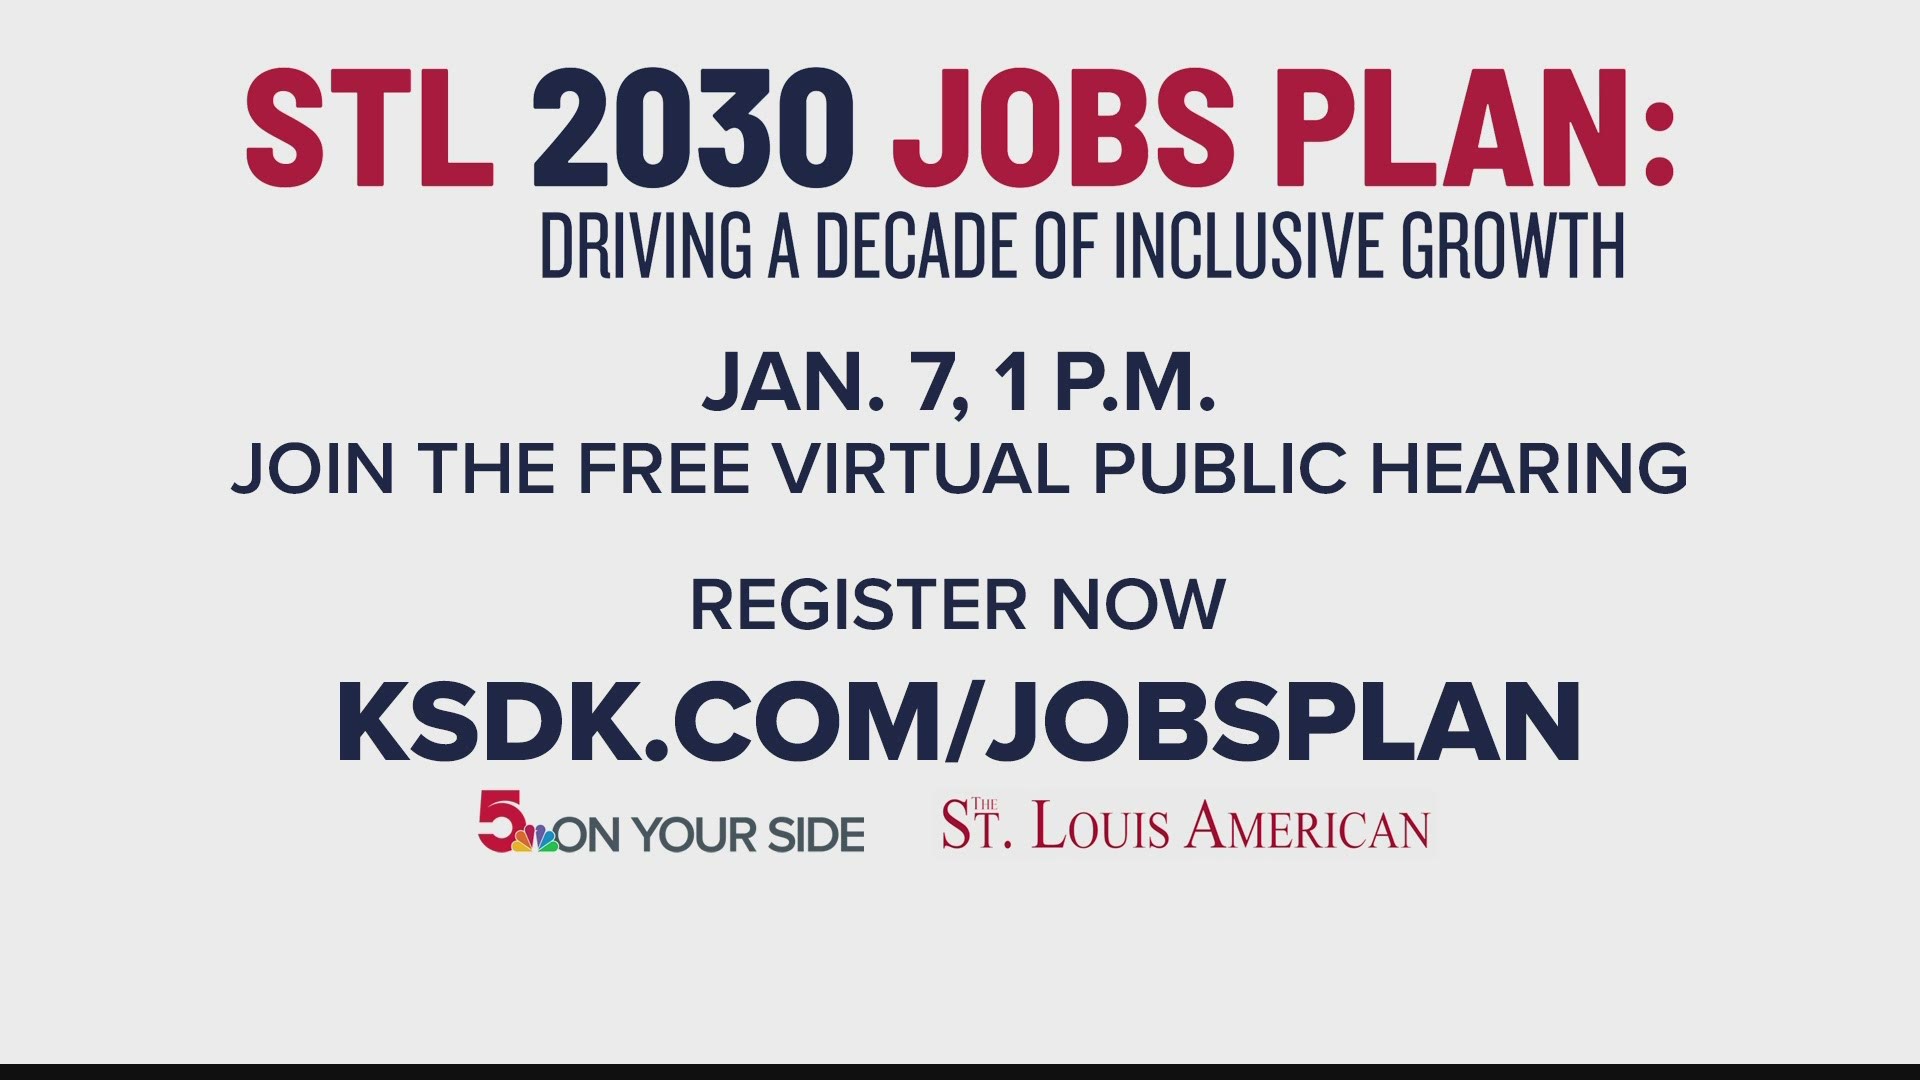 A roadmap for creating thousands of new jobs for our region has been developed by a new group called Greater St. Louis Inc.